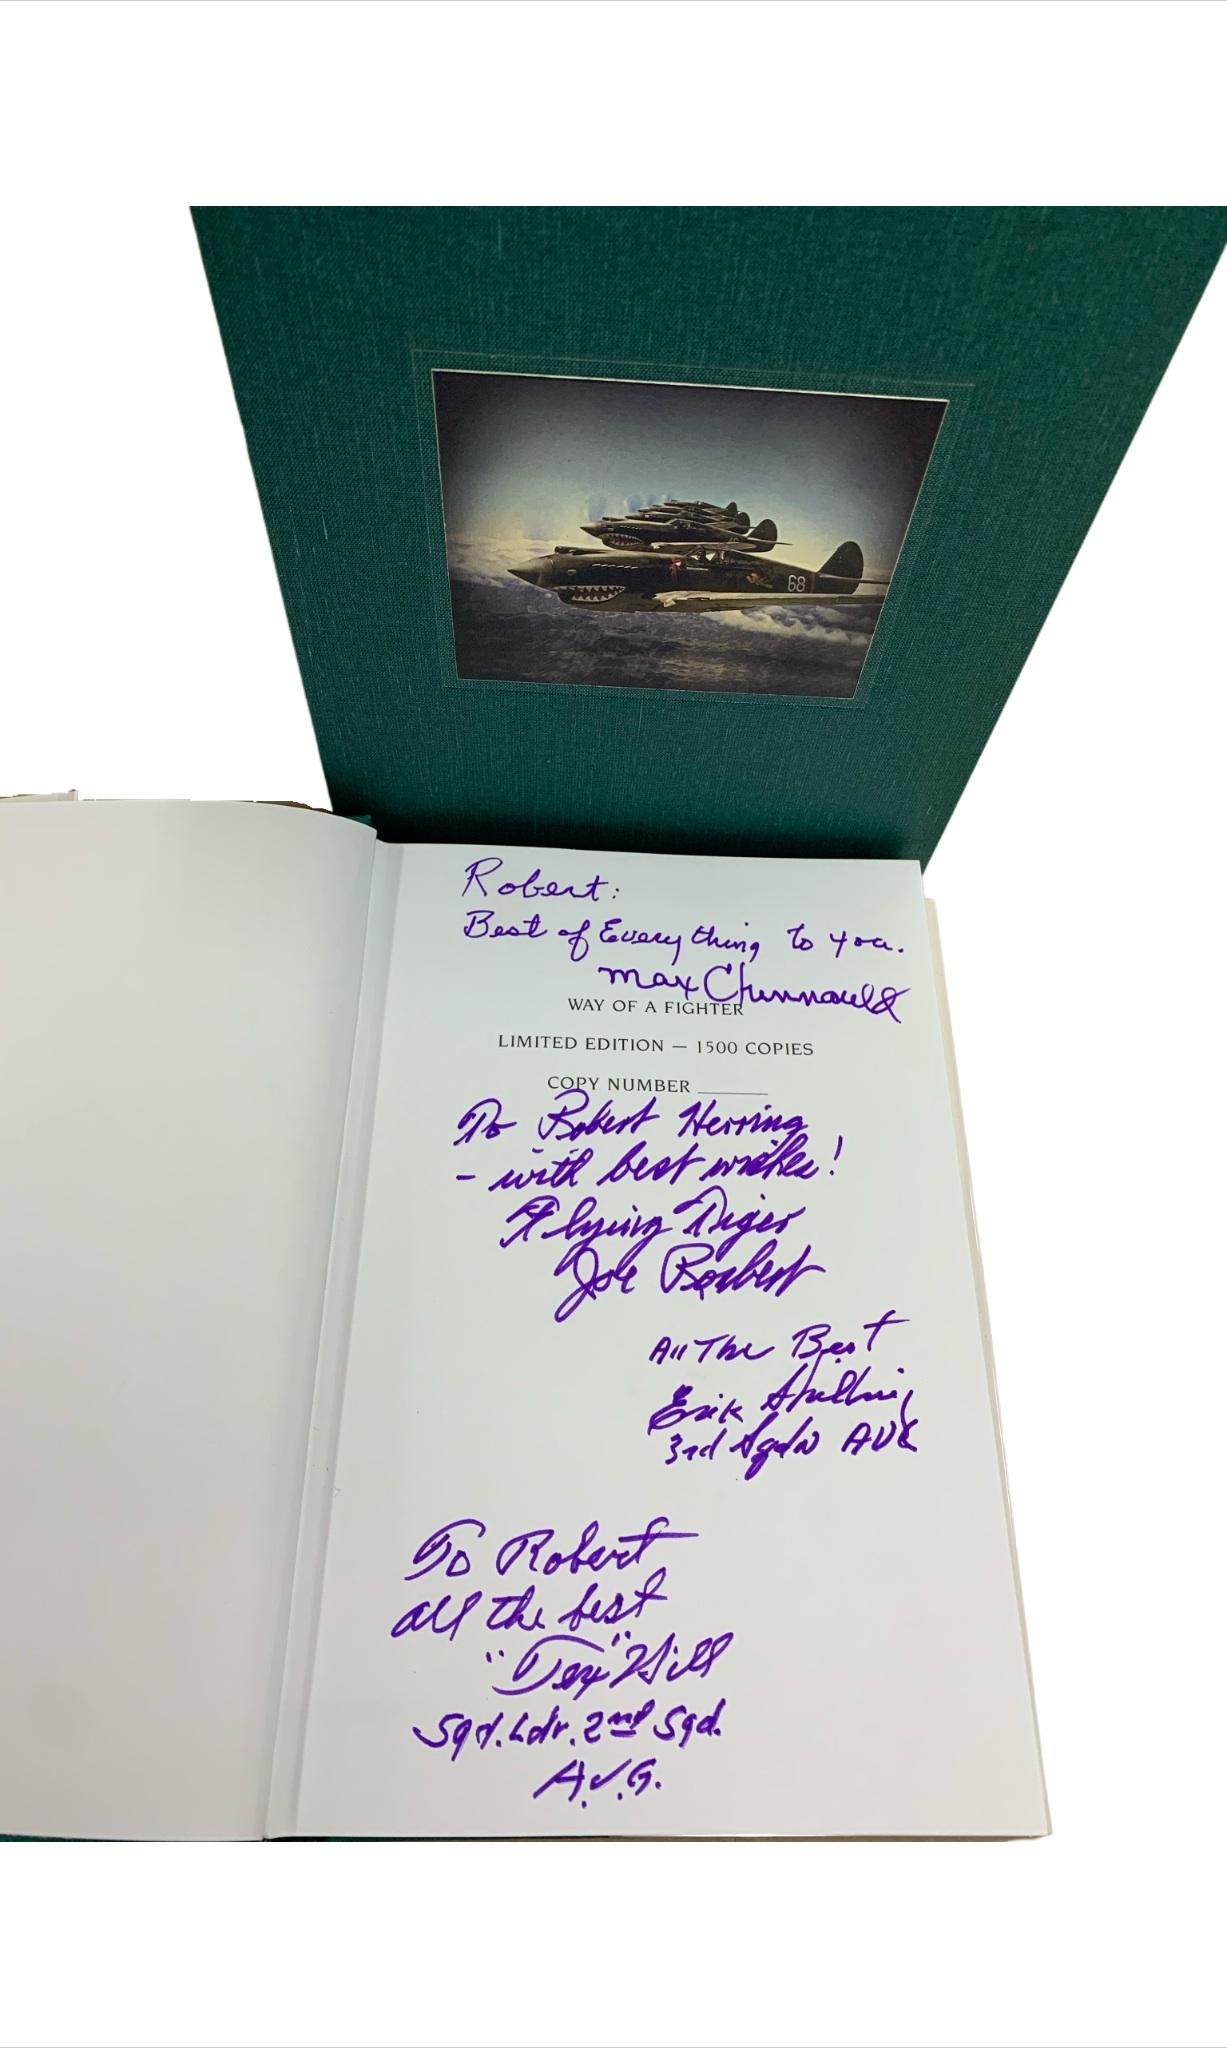 American Way of a Fighter by Claire Lee Chennault Ltd Edition Signed by Flying Tigers